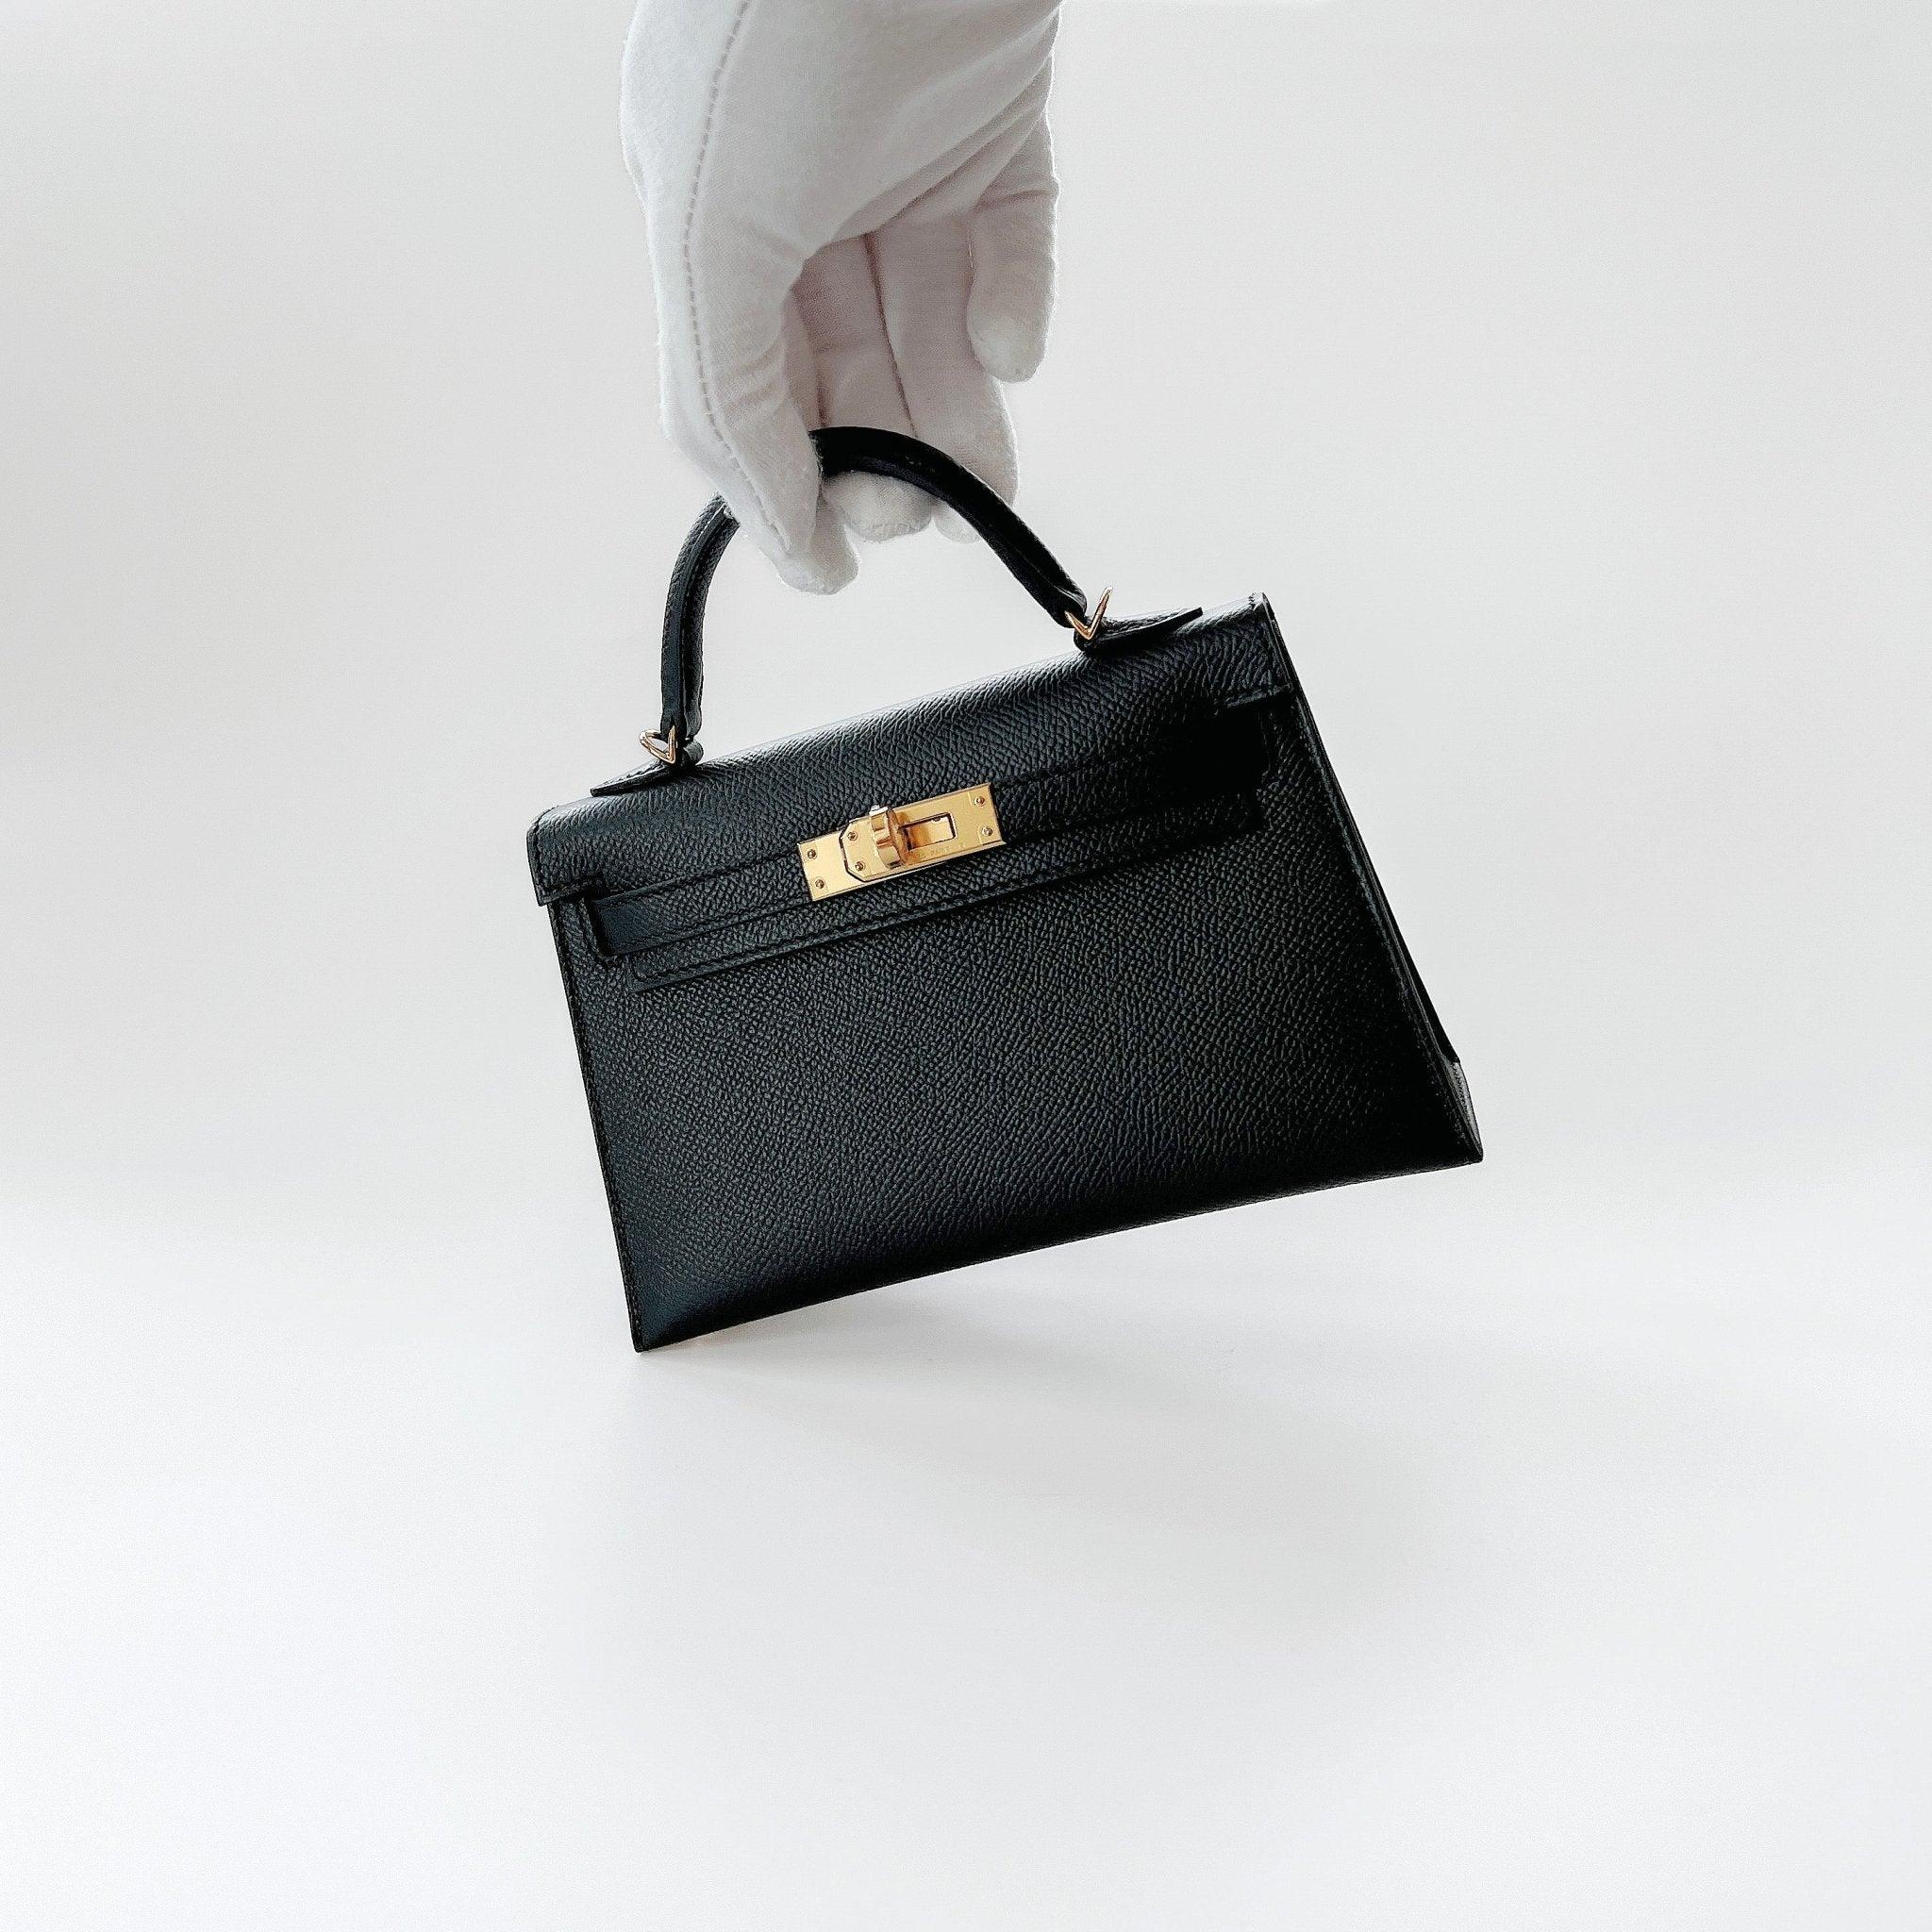 Shop this classic Hermes Mini Kelly In Black With Gold Hardware, Epsom Leather. This Hermes Mini Kelly II comes in Sellier Epsom Leather making it hold its shape. The base has 4 gold plated feet to prevent scratching to the bottom of the bag. This